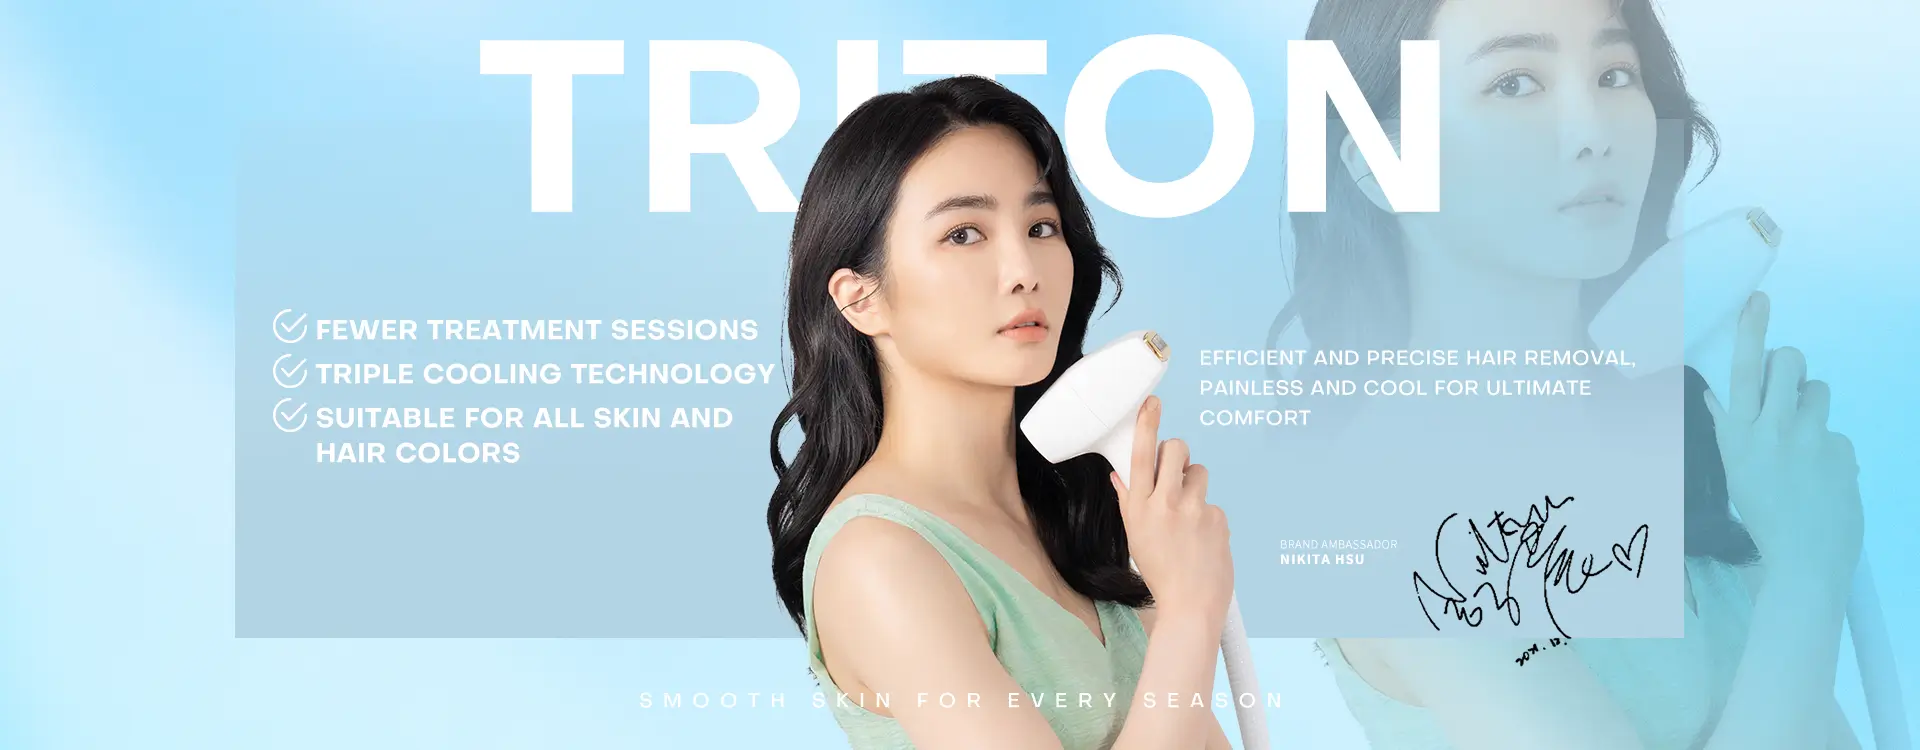 The best hair removal | Triton Laser Hair Removal